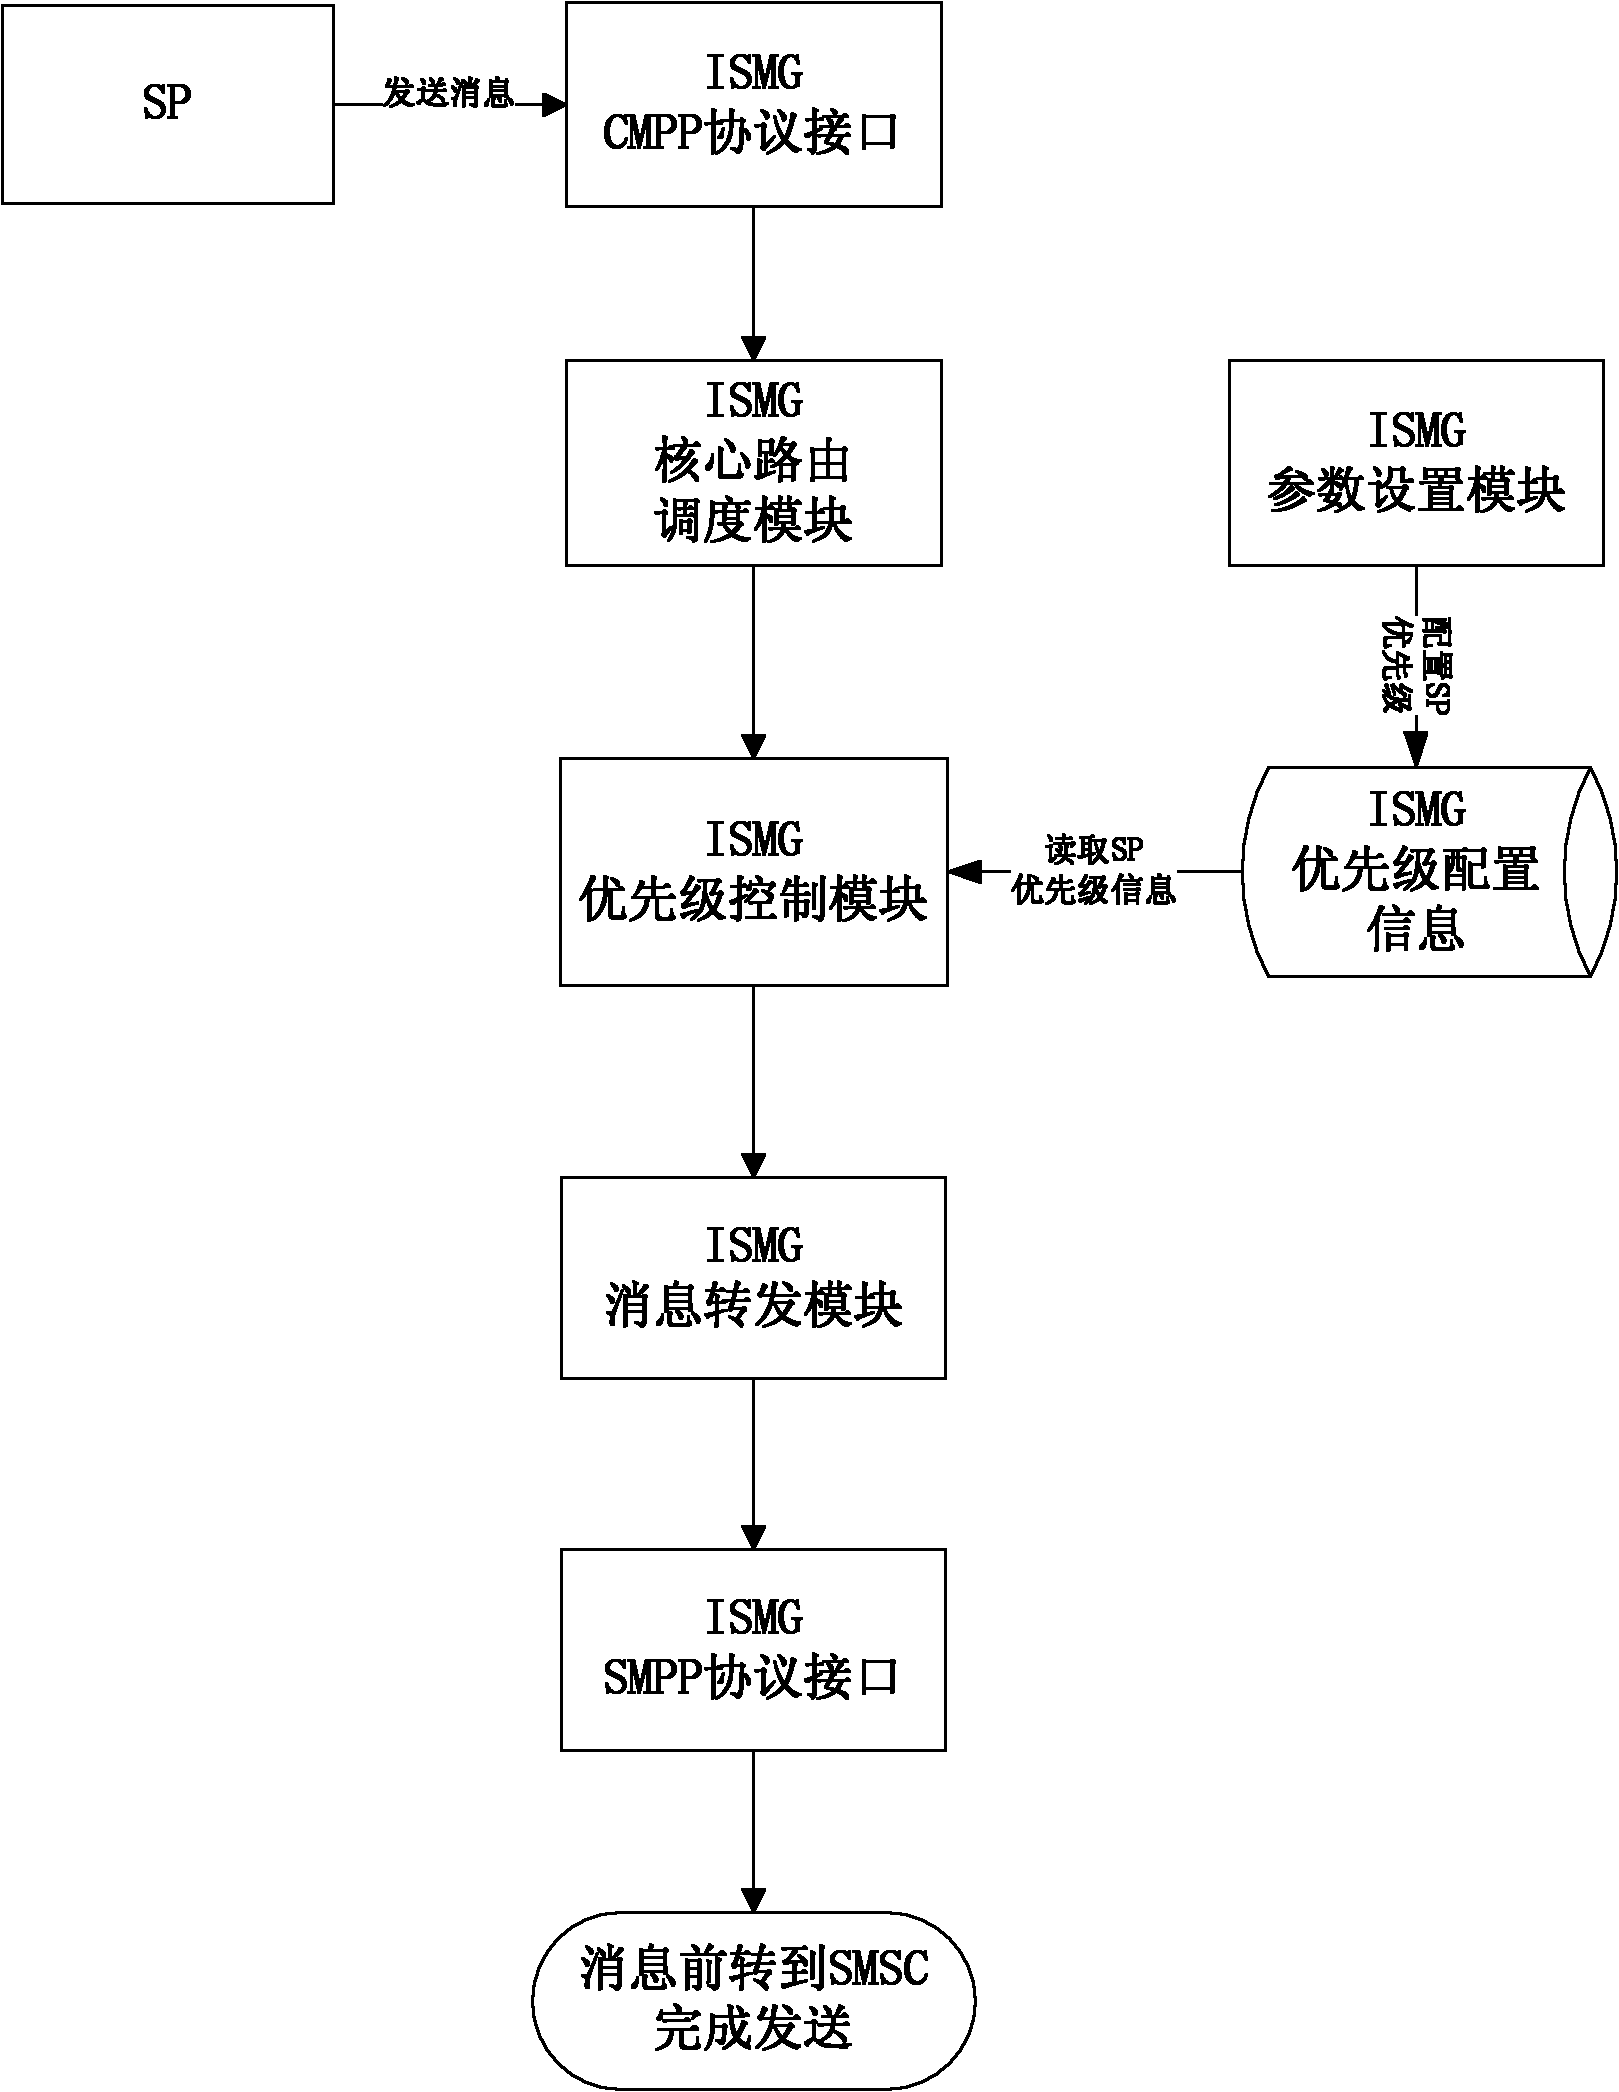 Method for transmitting short message service (SMS) and SMS gateway